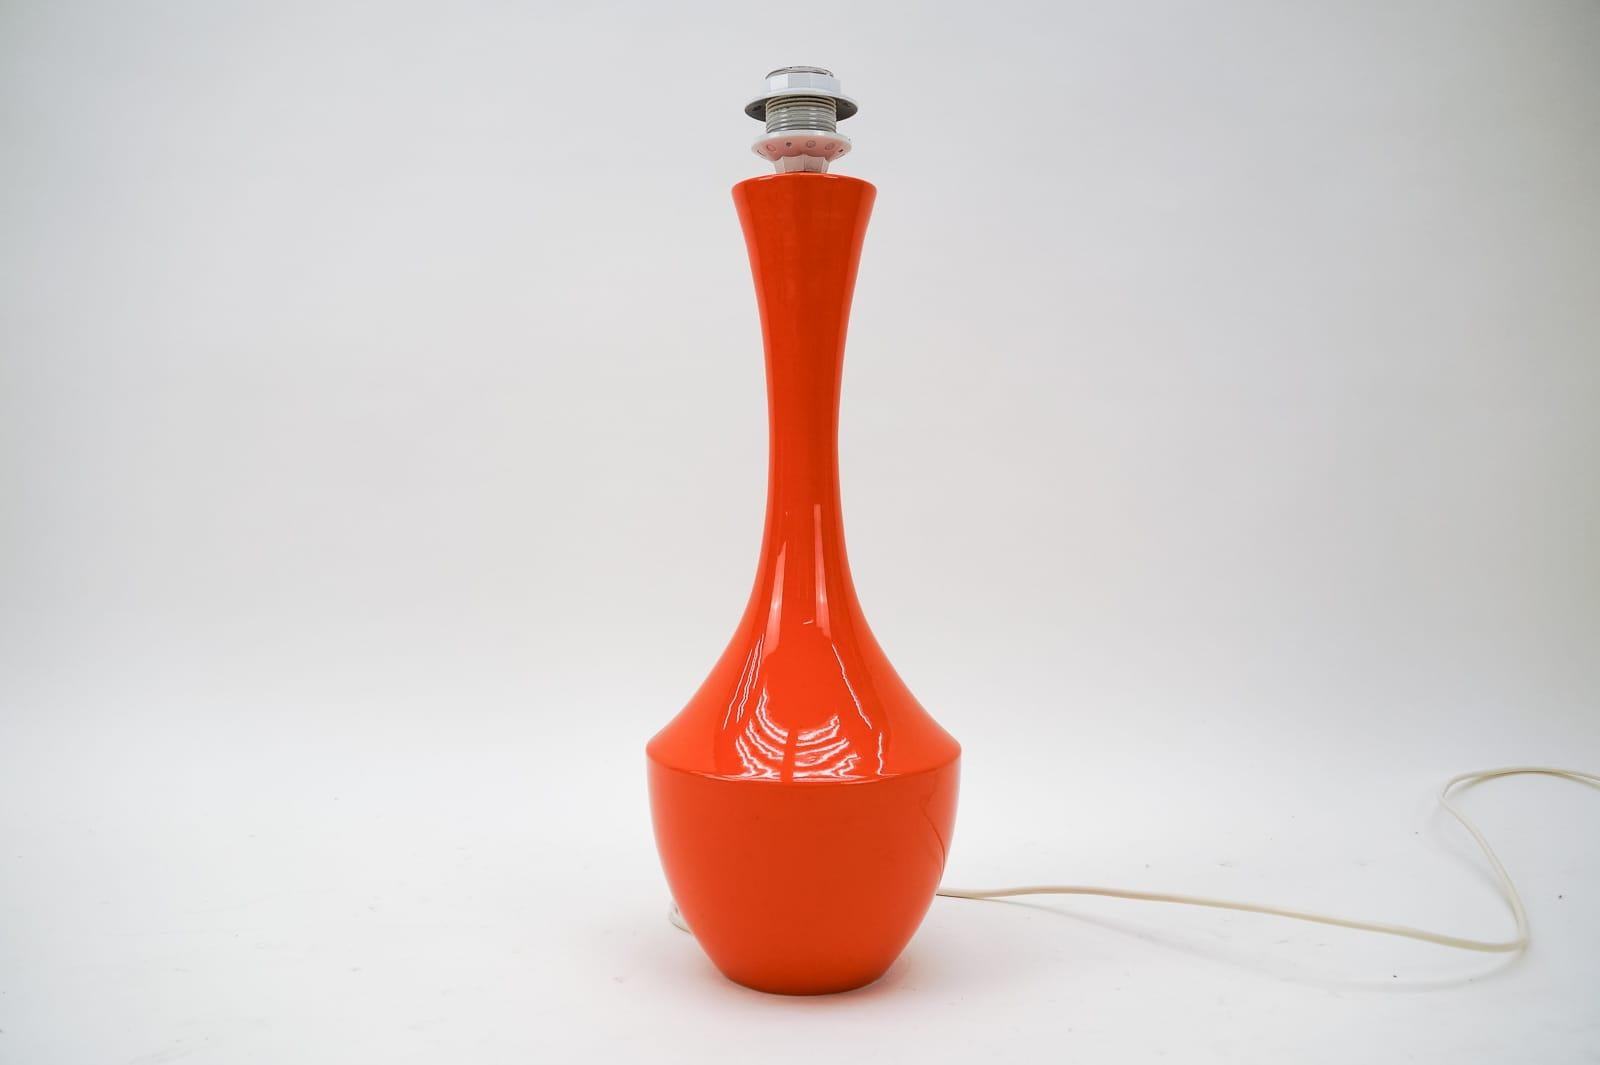 Italian Shapely Orange Ceramic Table Lamp, Made in Italy 1960s For Sale